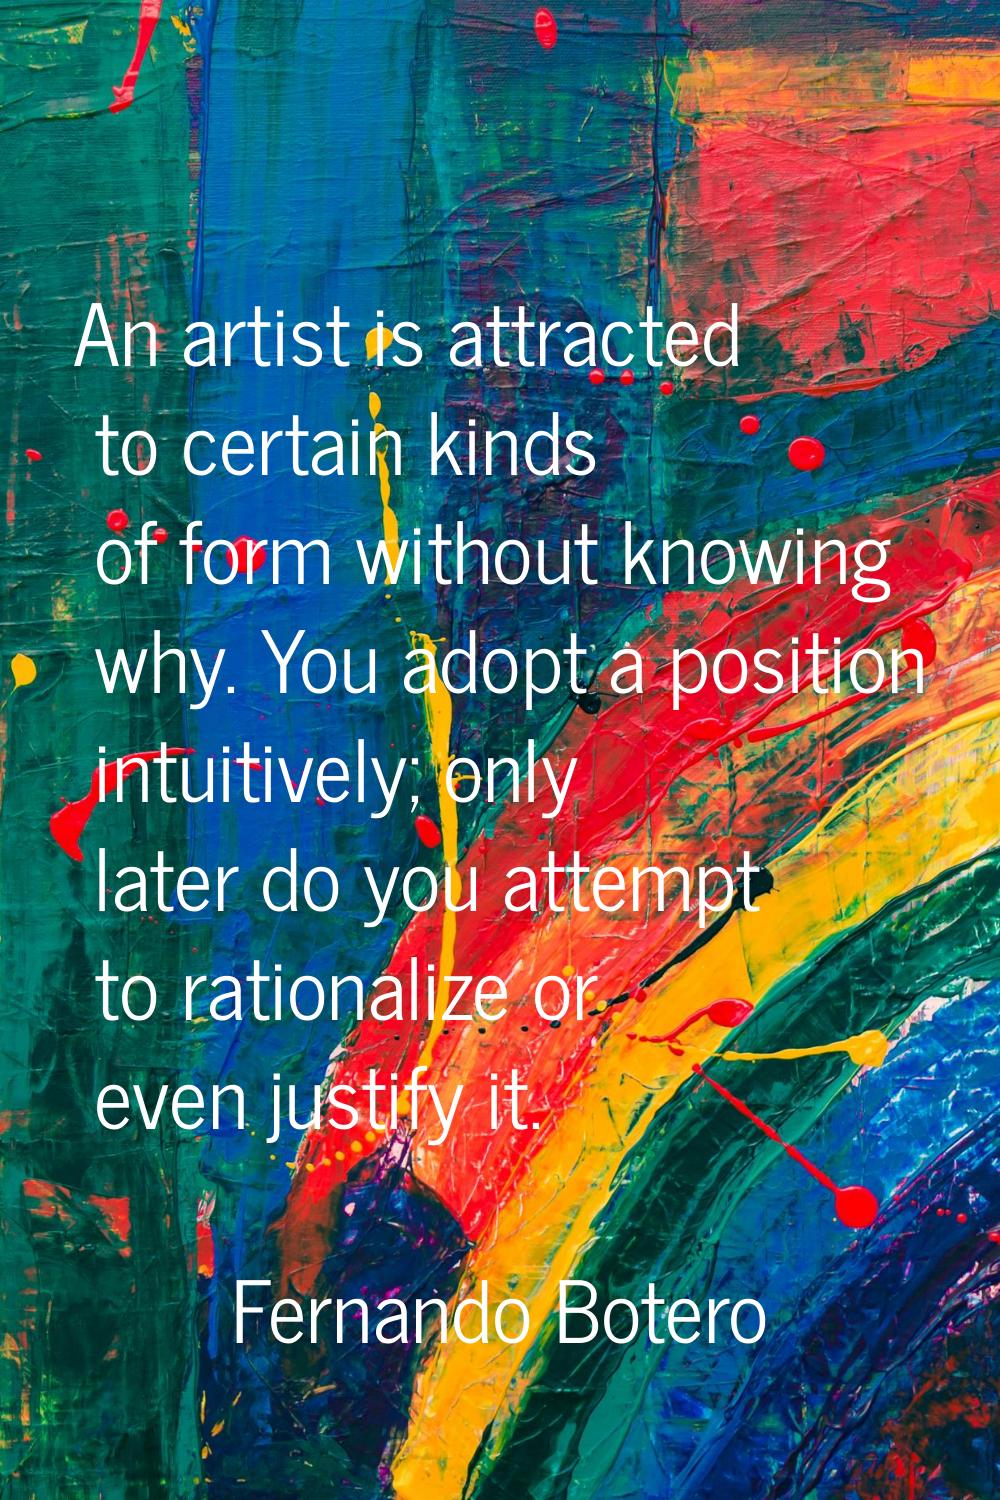 An artist is attracted to certain kinds of form without knowing why. You adopt a position intuitive